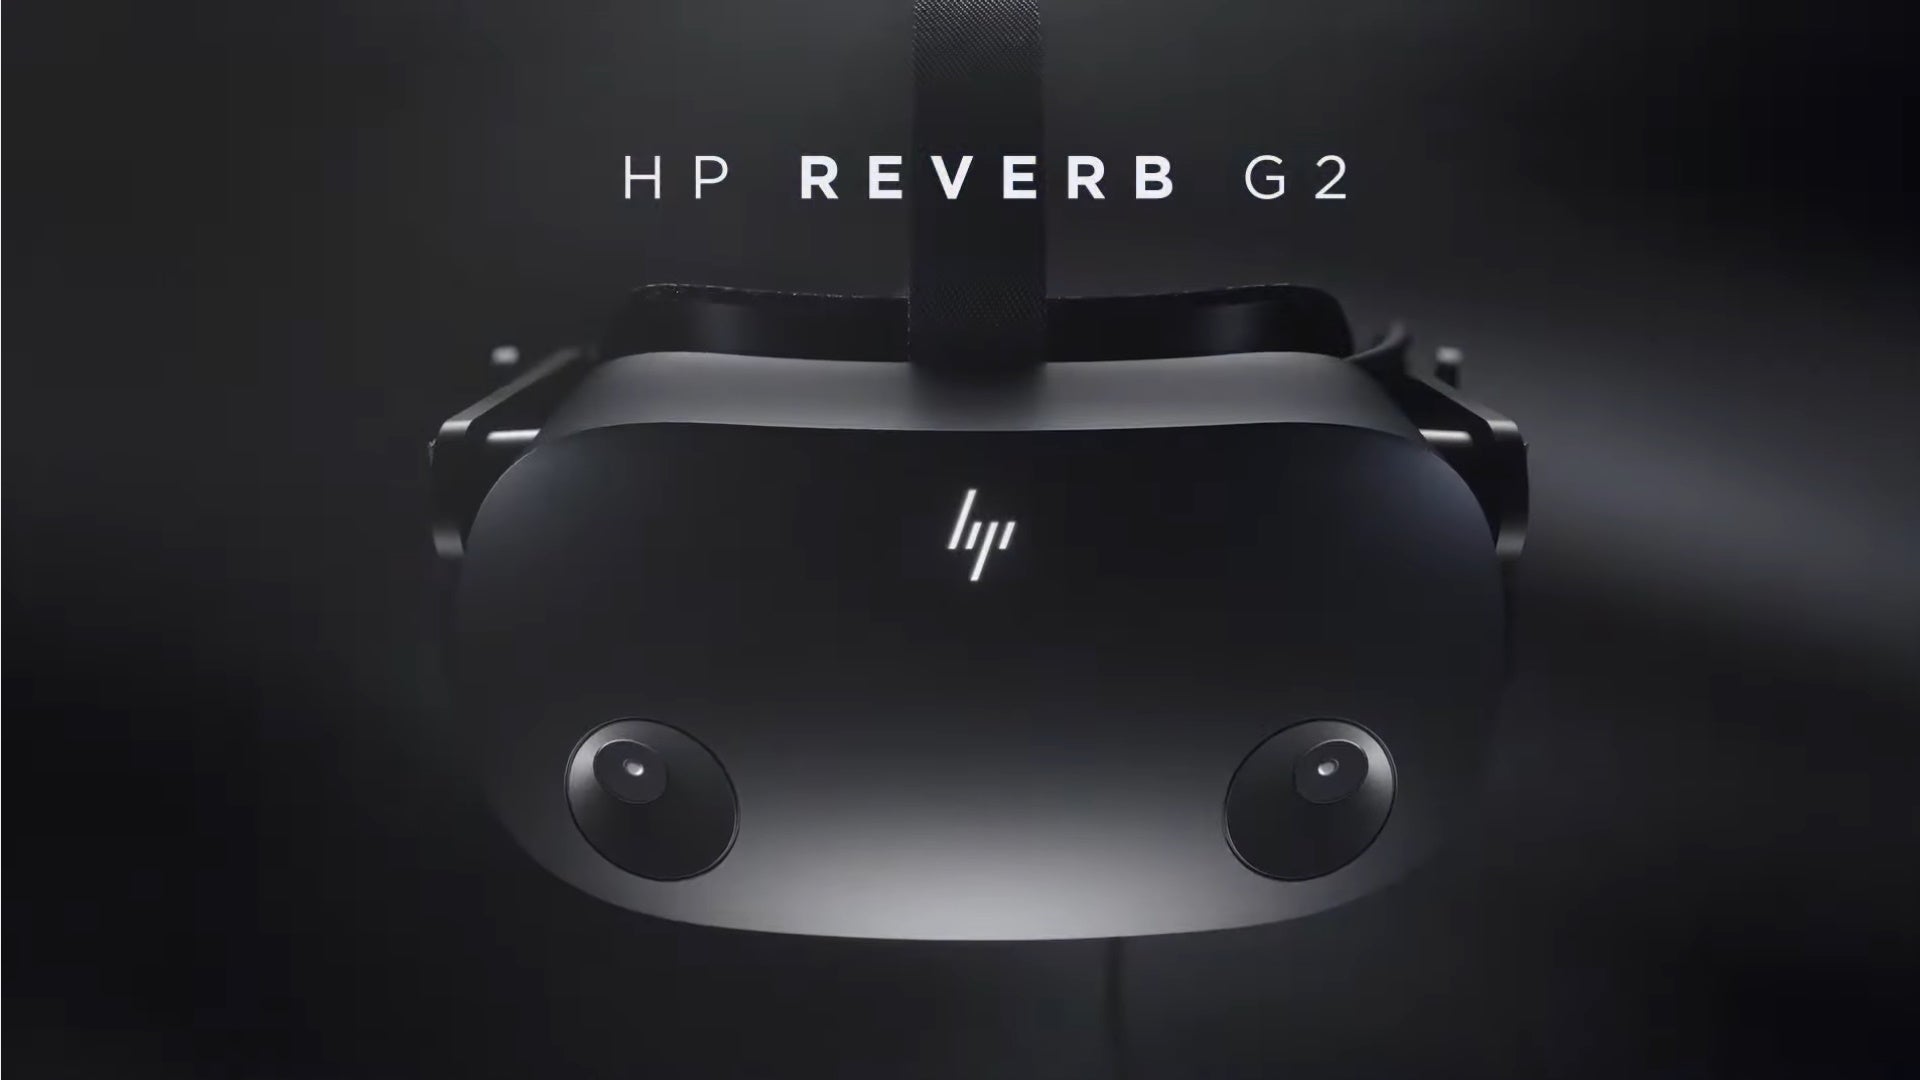 Image for Get the HP Reverb G2 VR headset for $399 after a $200 discount